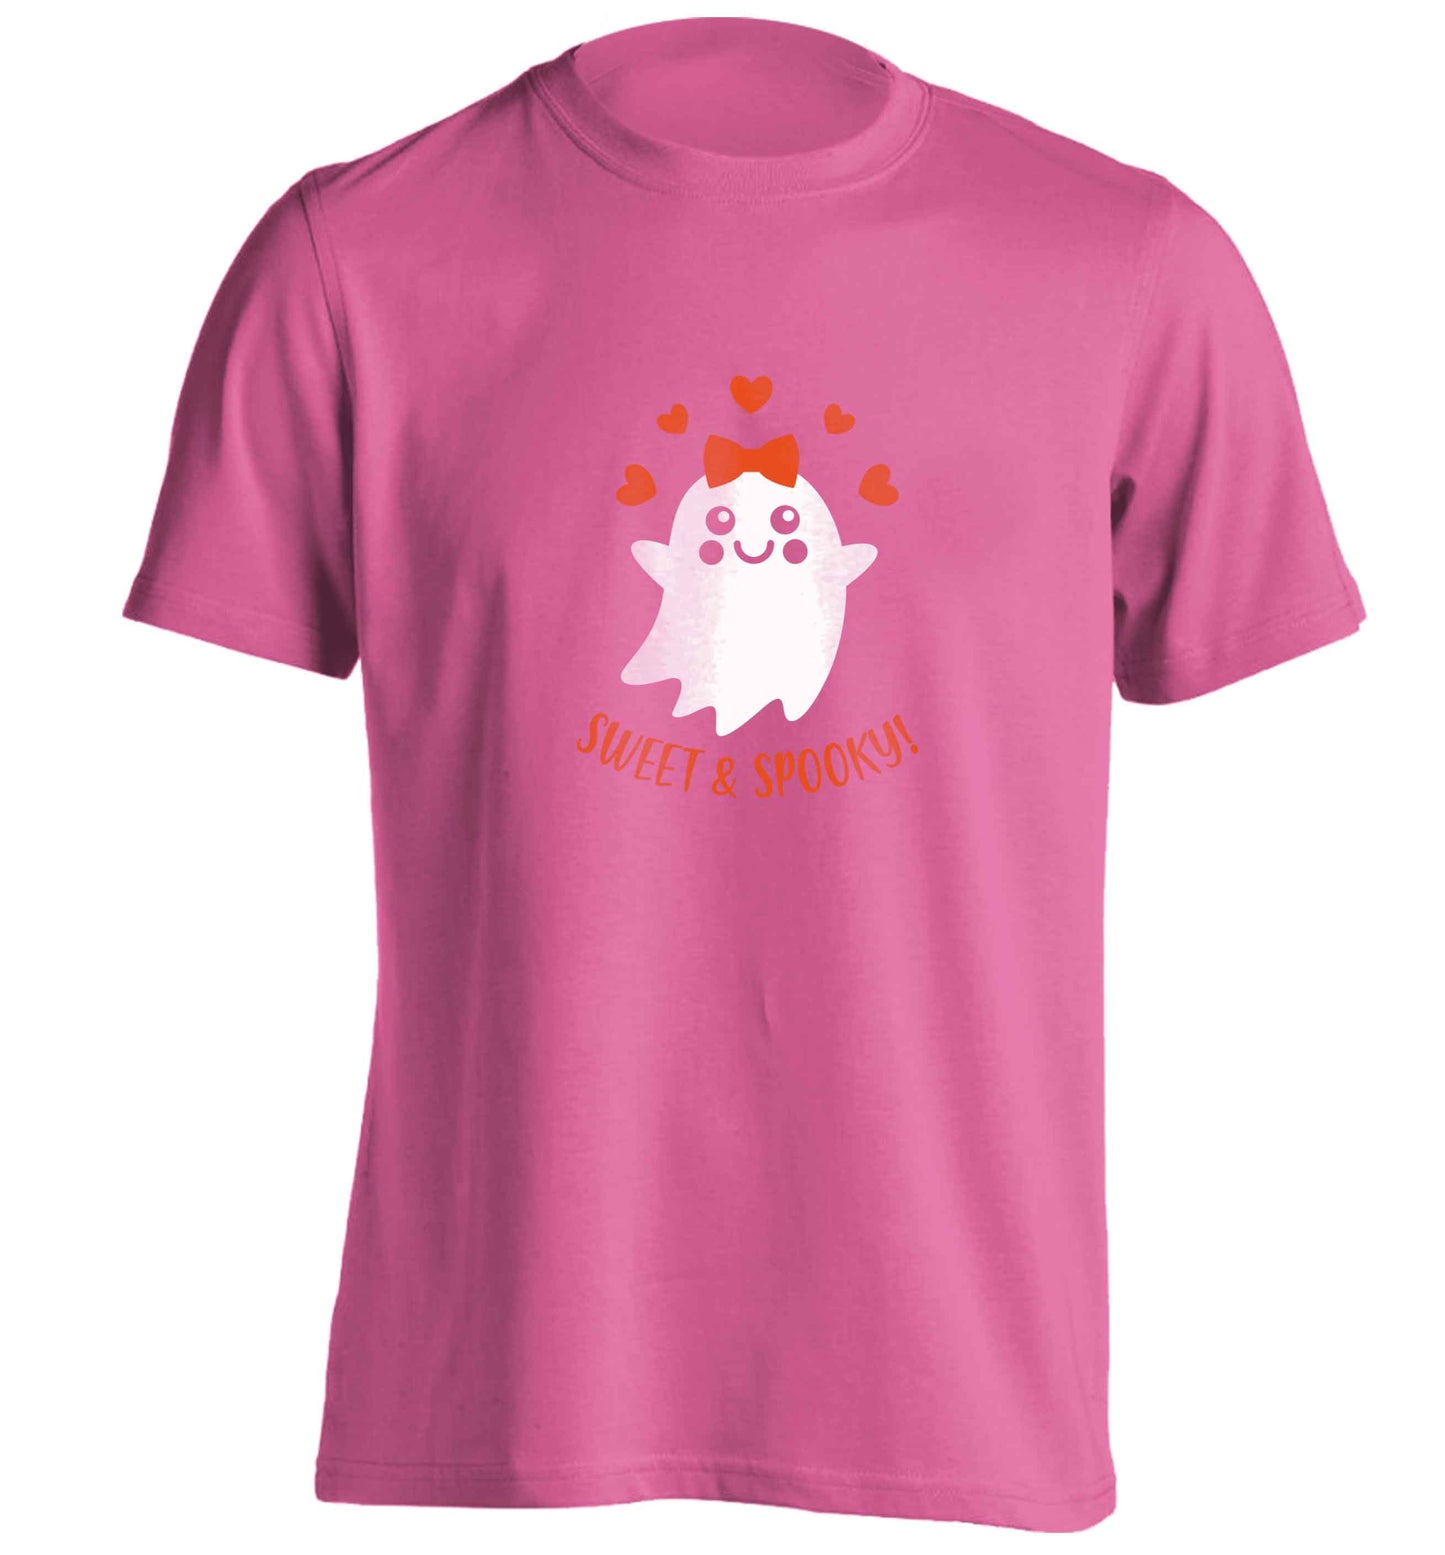 Sweet and spooky adults unisex pink Tshirt 2XL